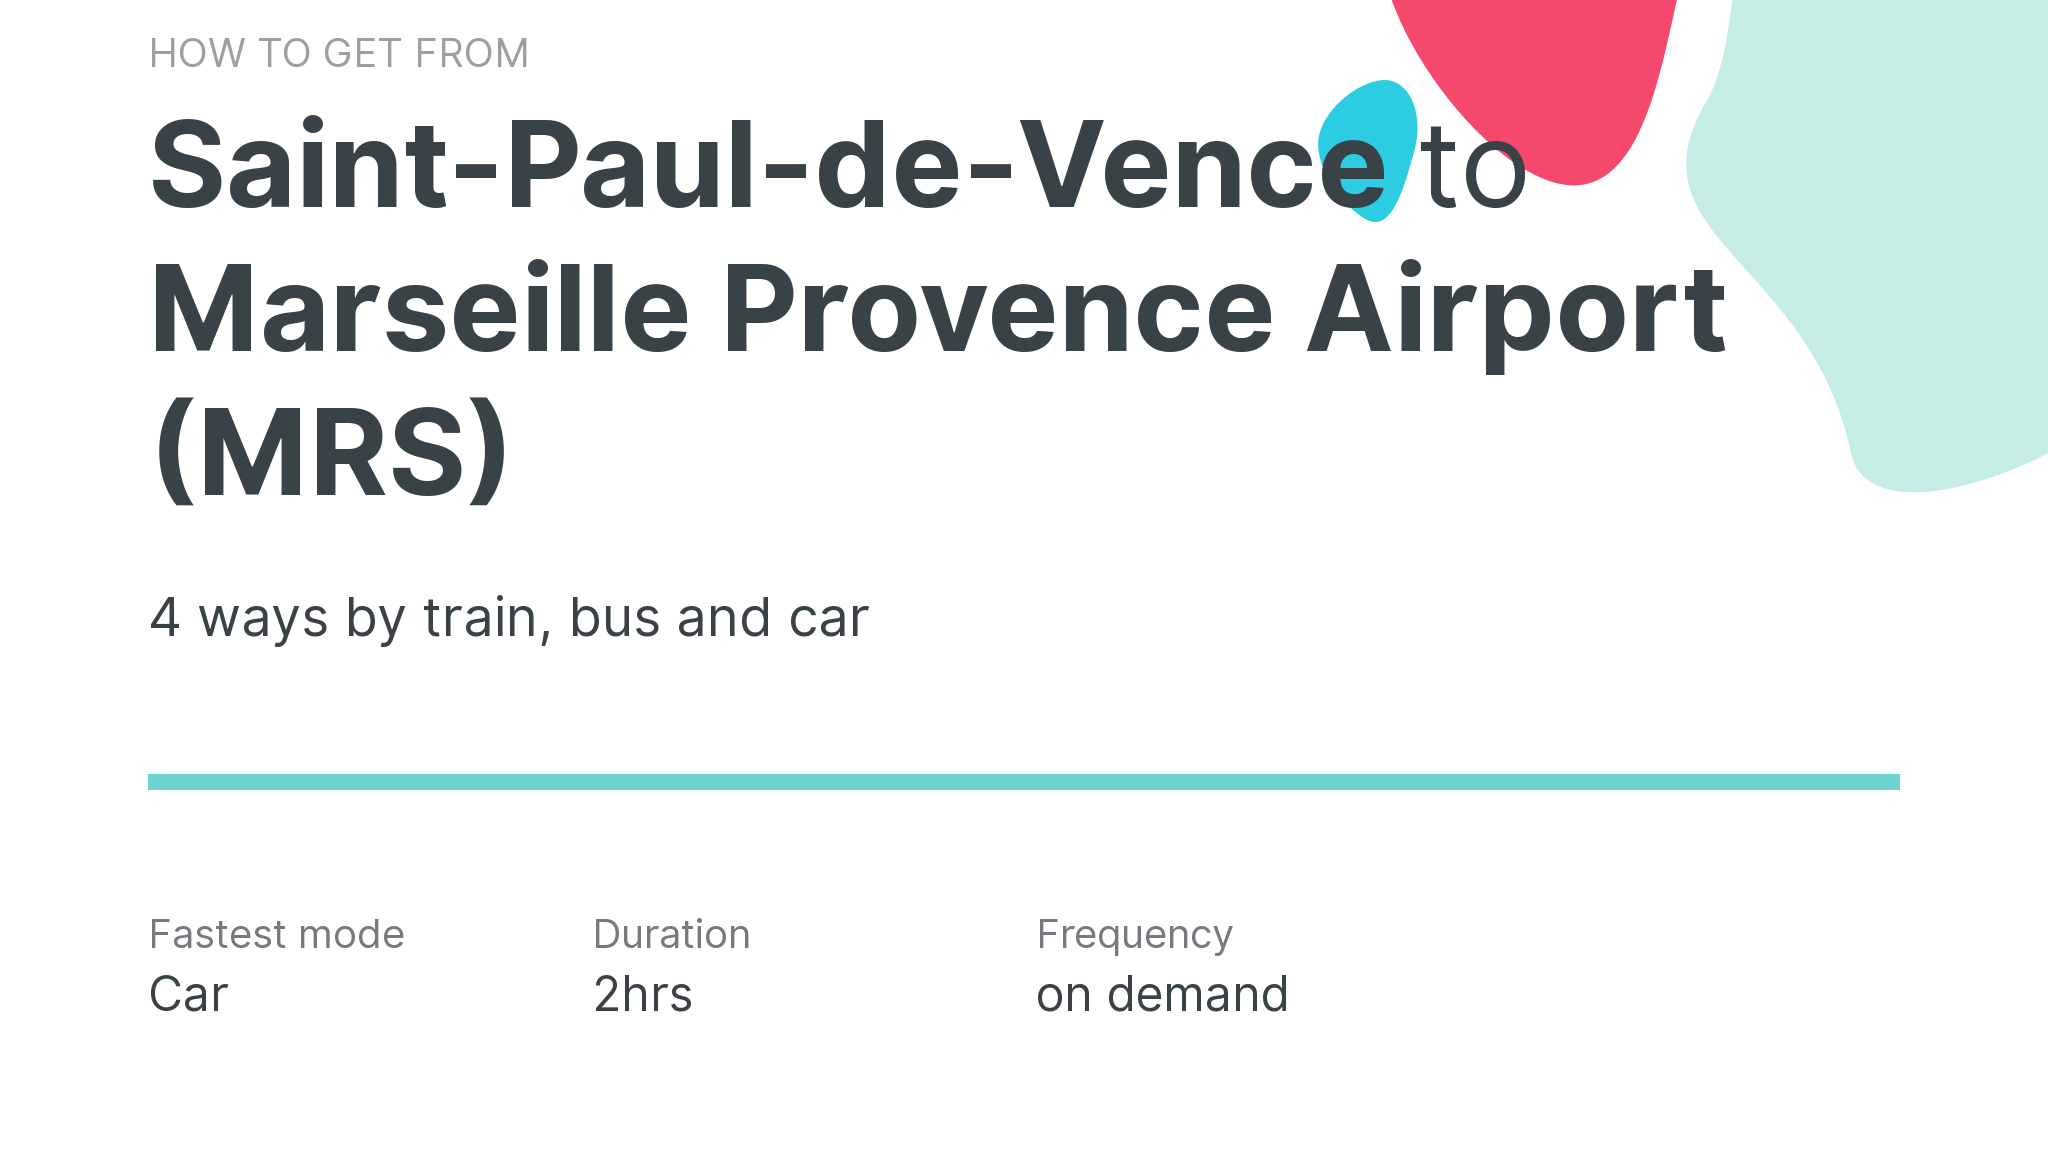 How do I get from Saint-Paul-de-Vence to Marseille Provence Airport (MRS)